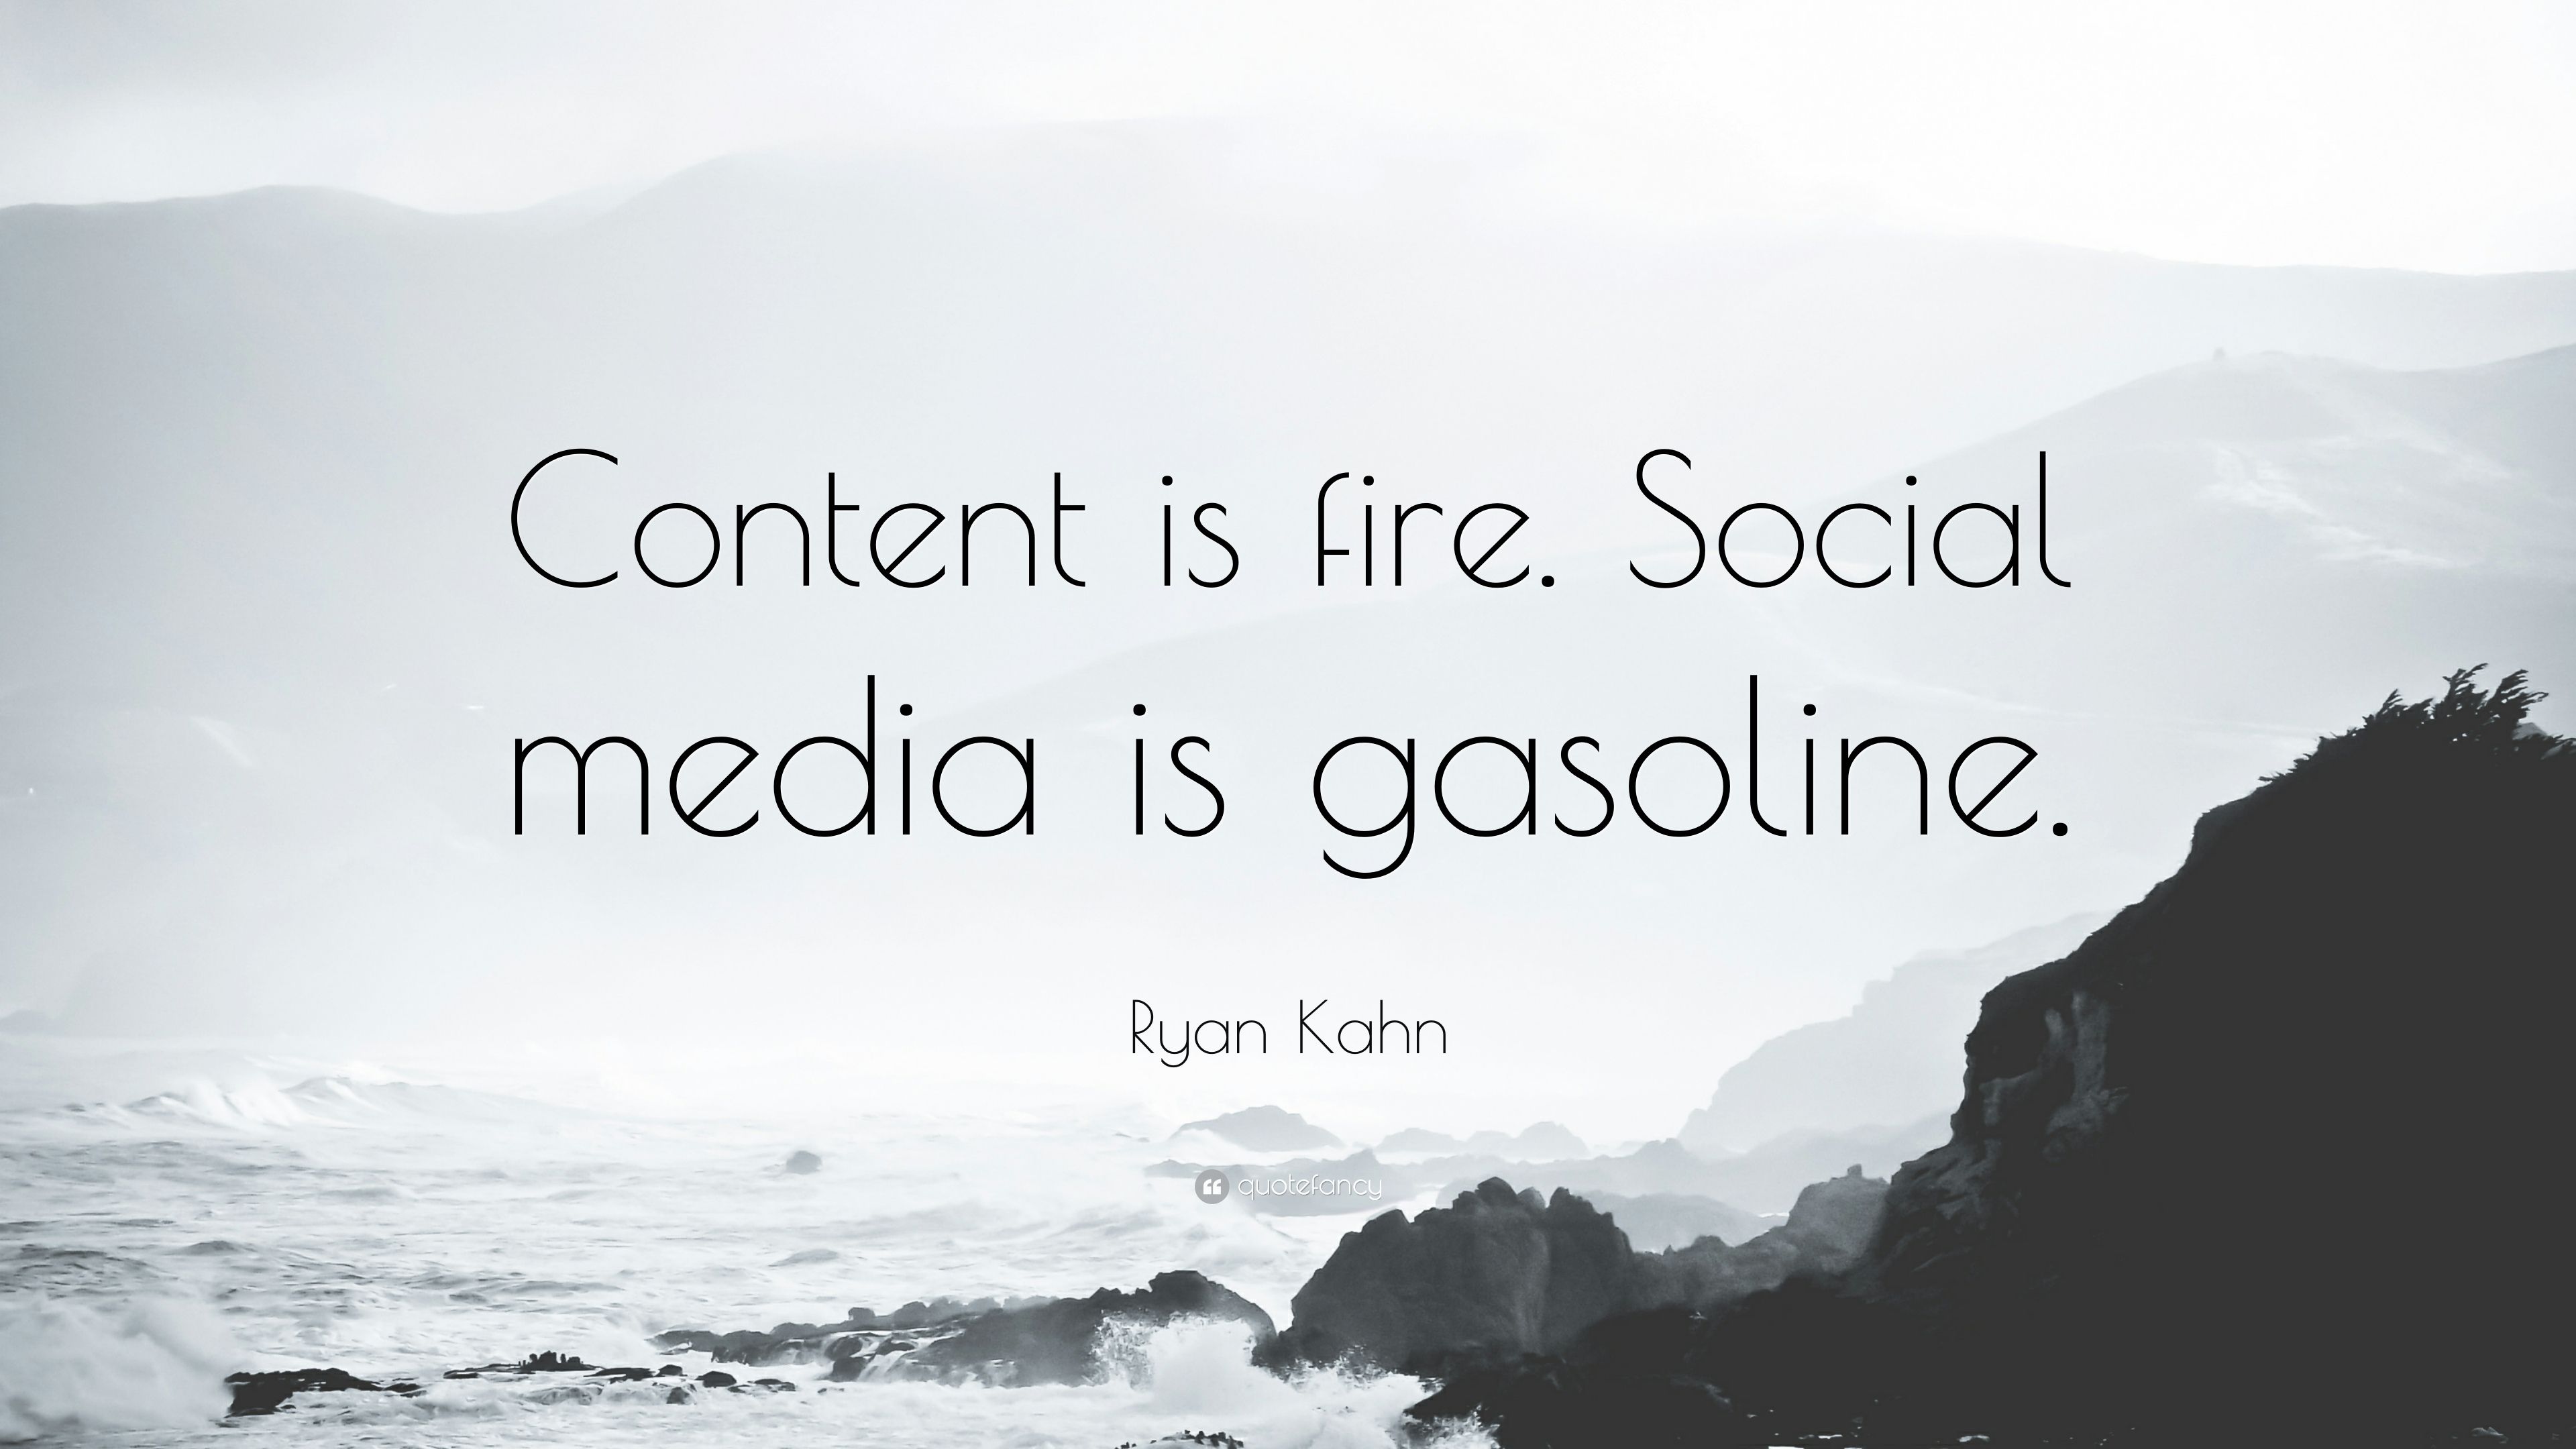 Ryan Kahn Quote: “Content is fire. Social media is gasoline.” 12